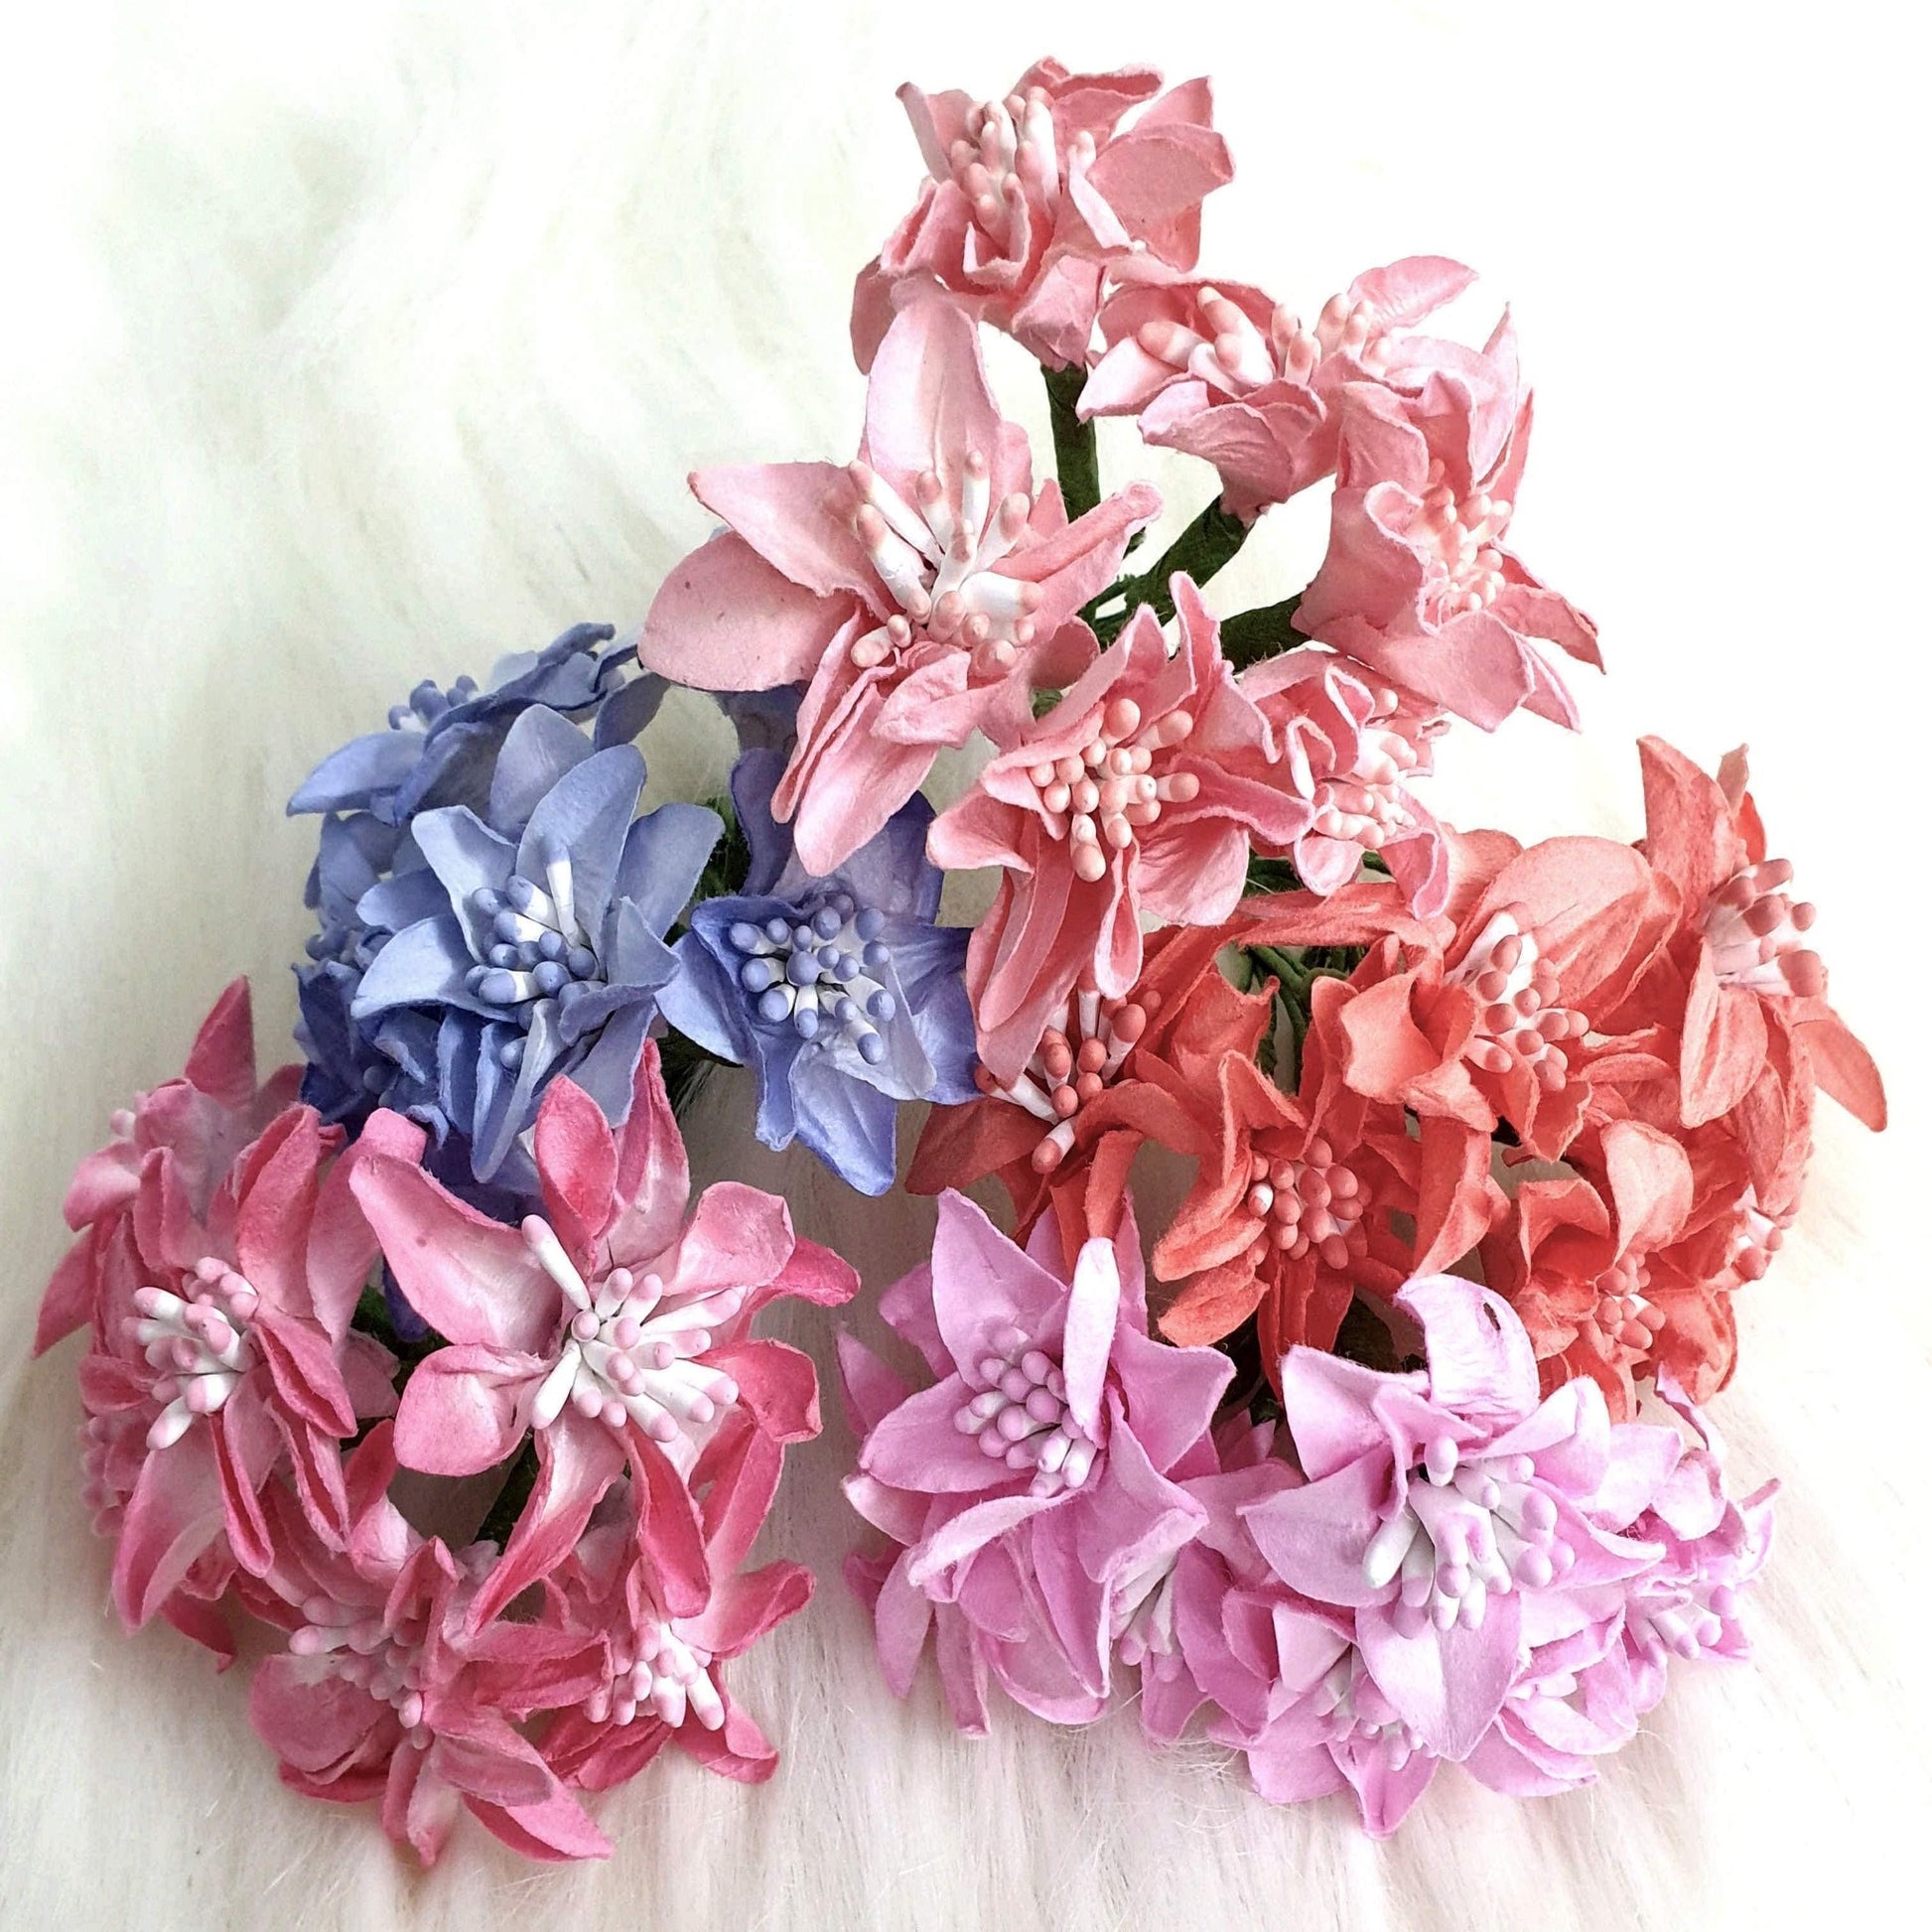 Indian Petals Beautiful Paper Flowers with Buds for DIY Craft, Trouseau Packing or Decoration (Bunch of 12) - Design 21 - Indian Petals